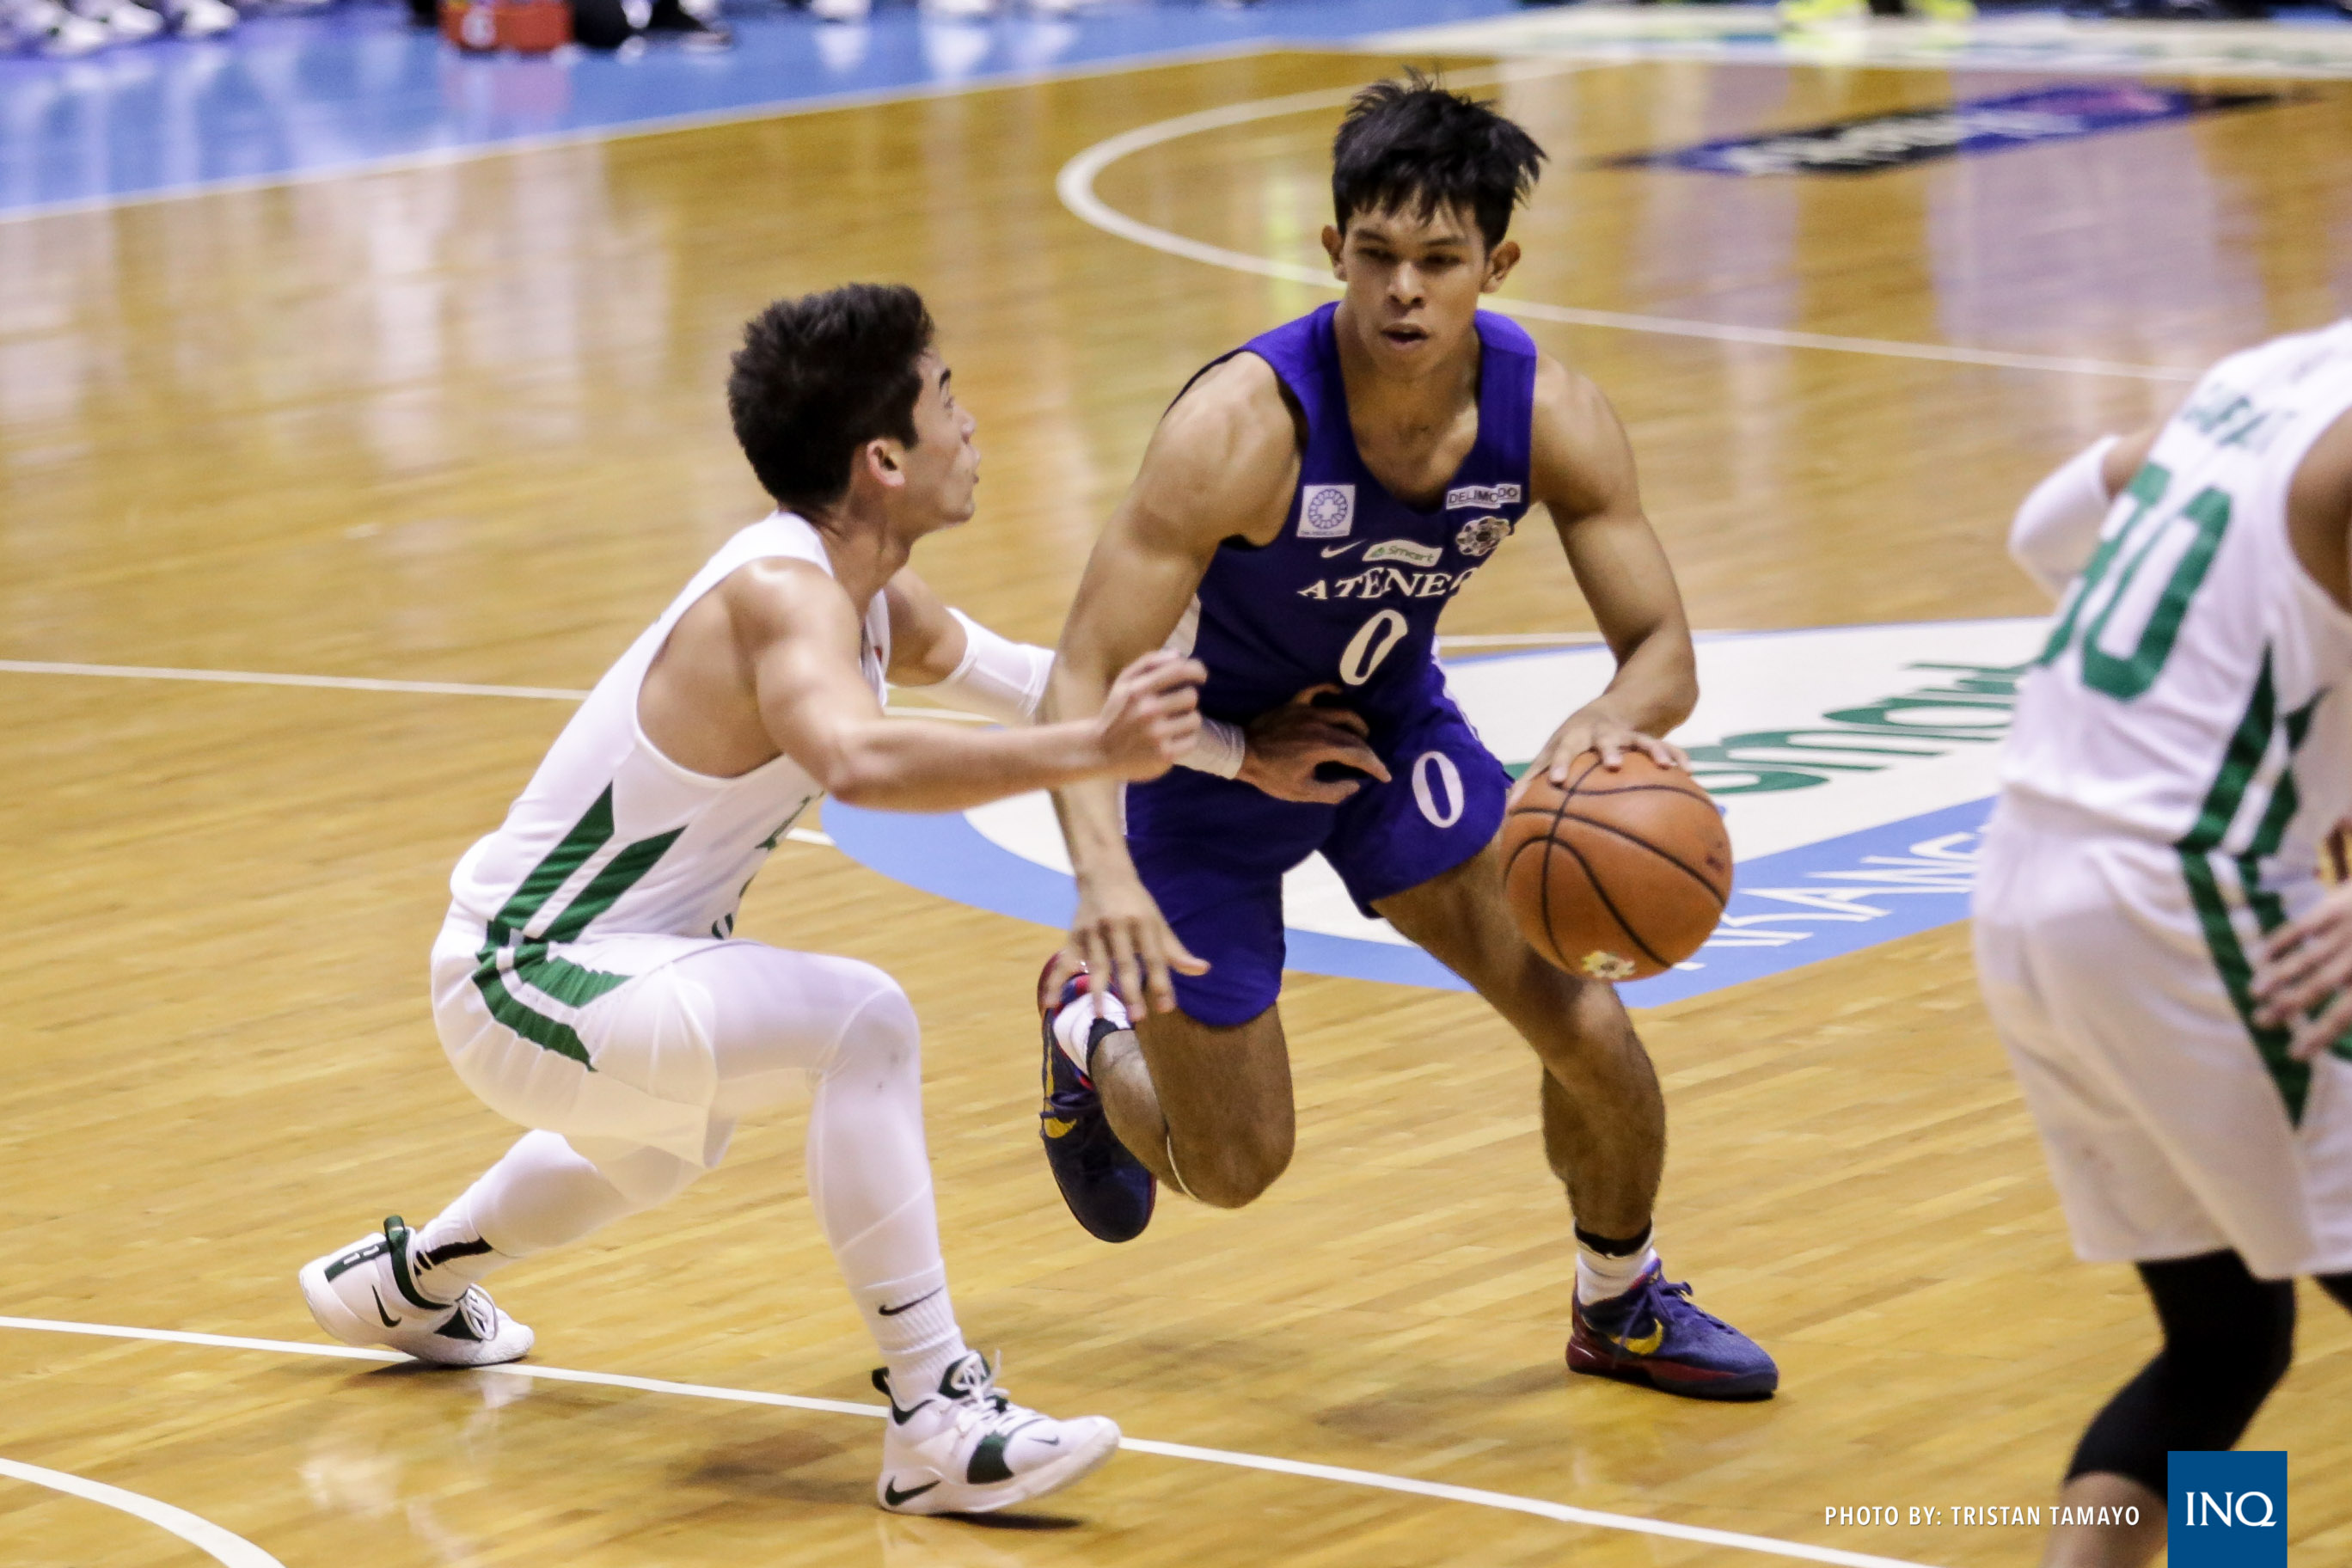 La Salle beats Ateneo for first time this season, moves a 